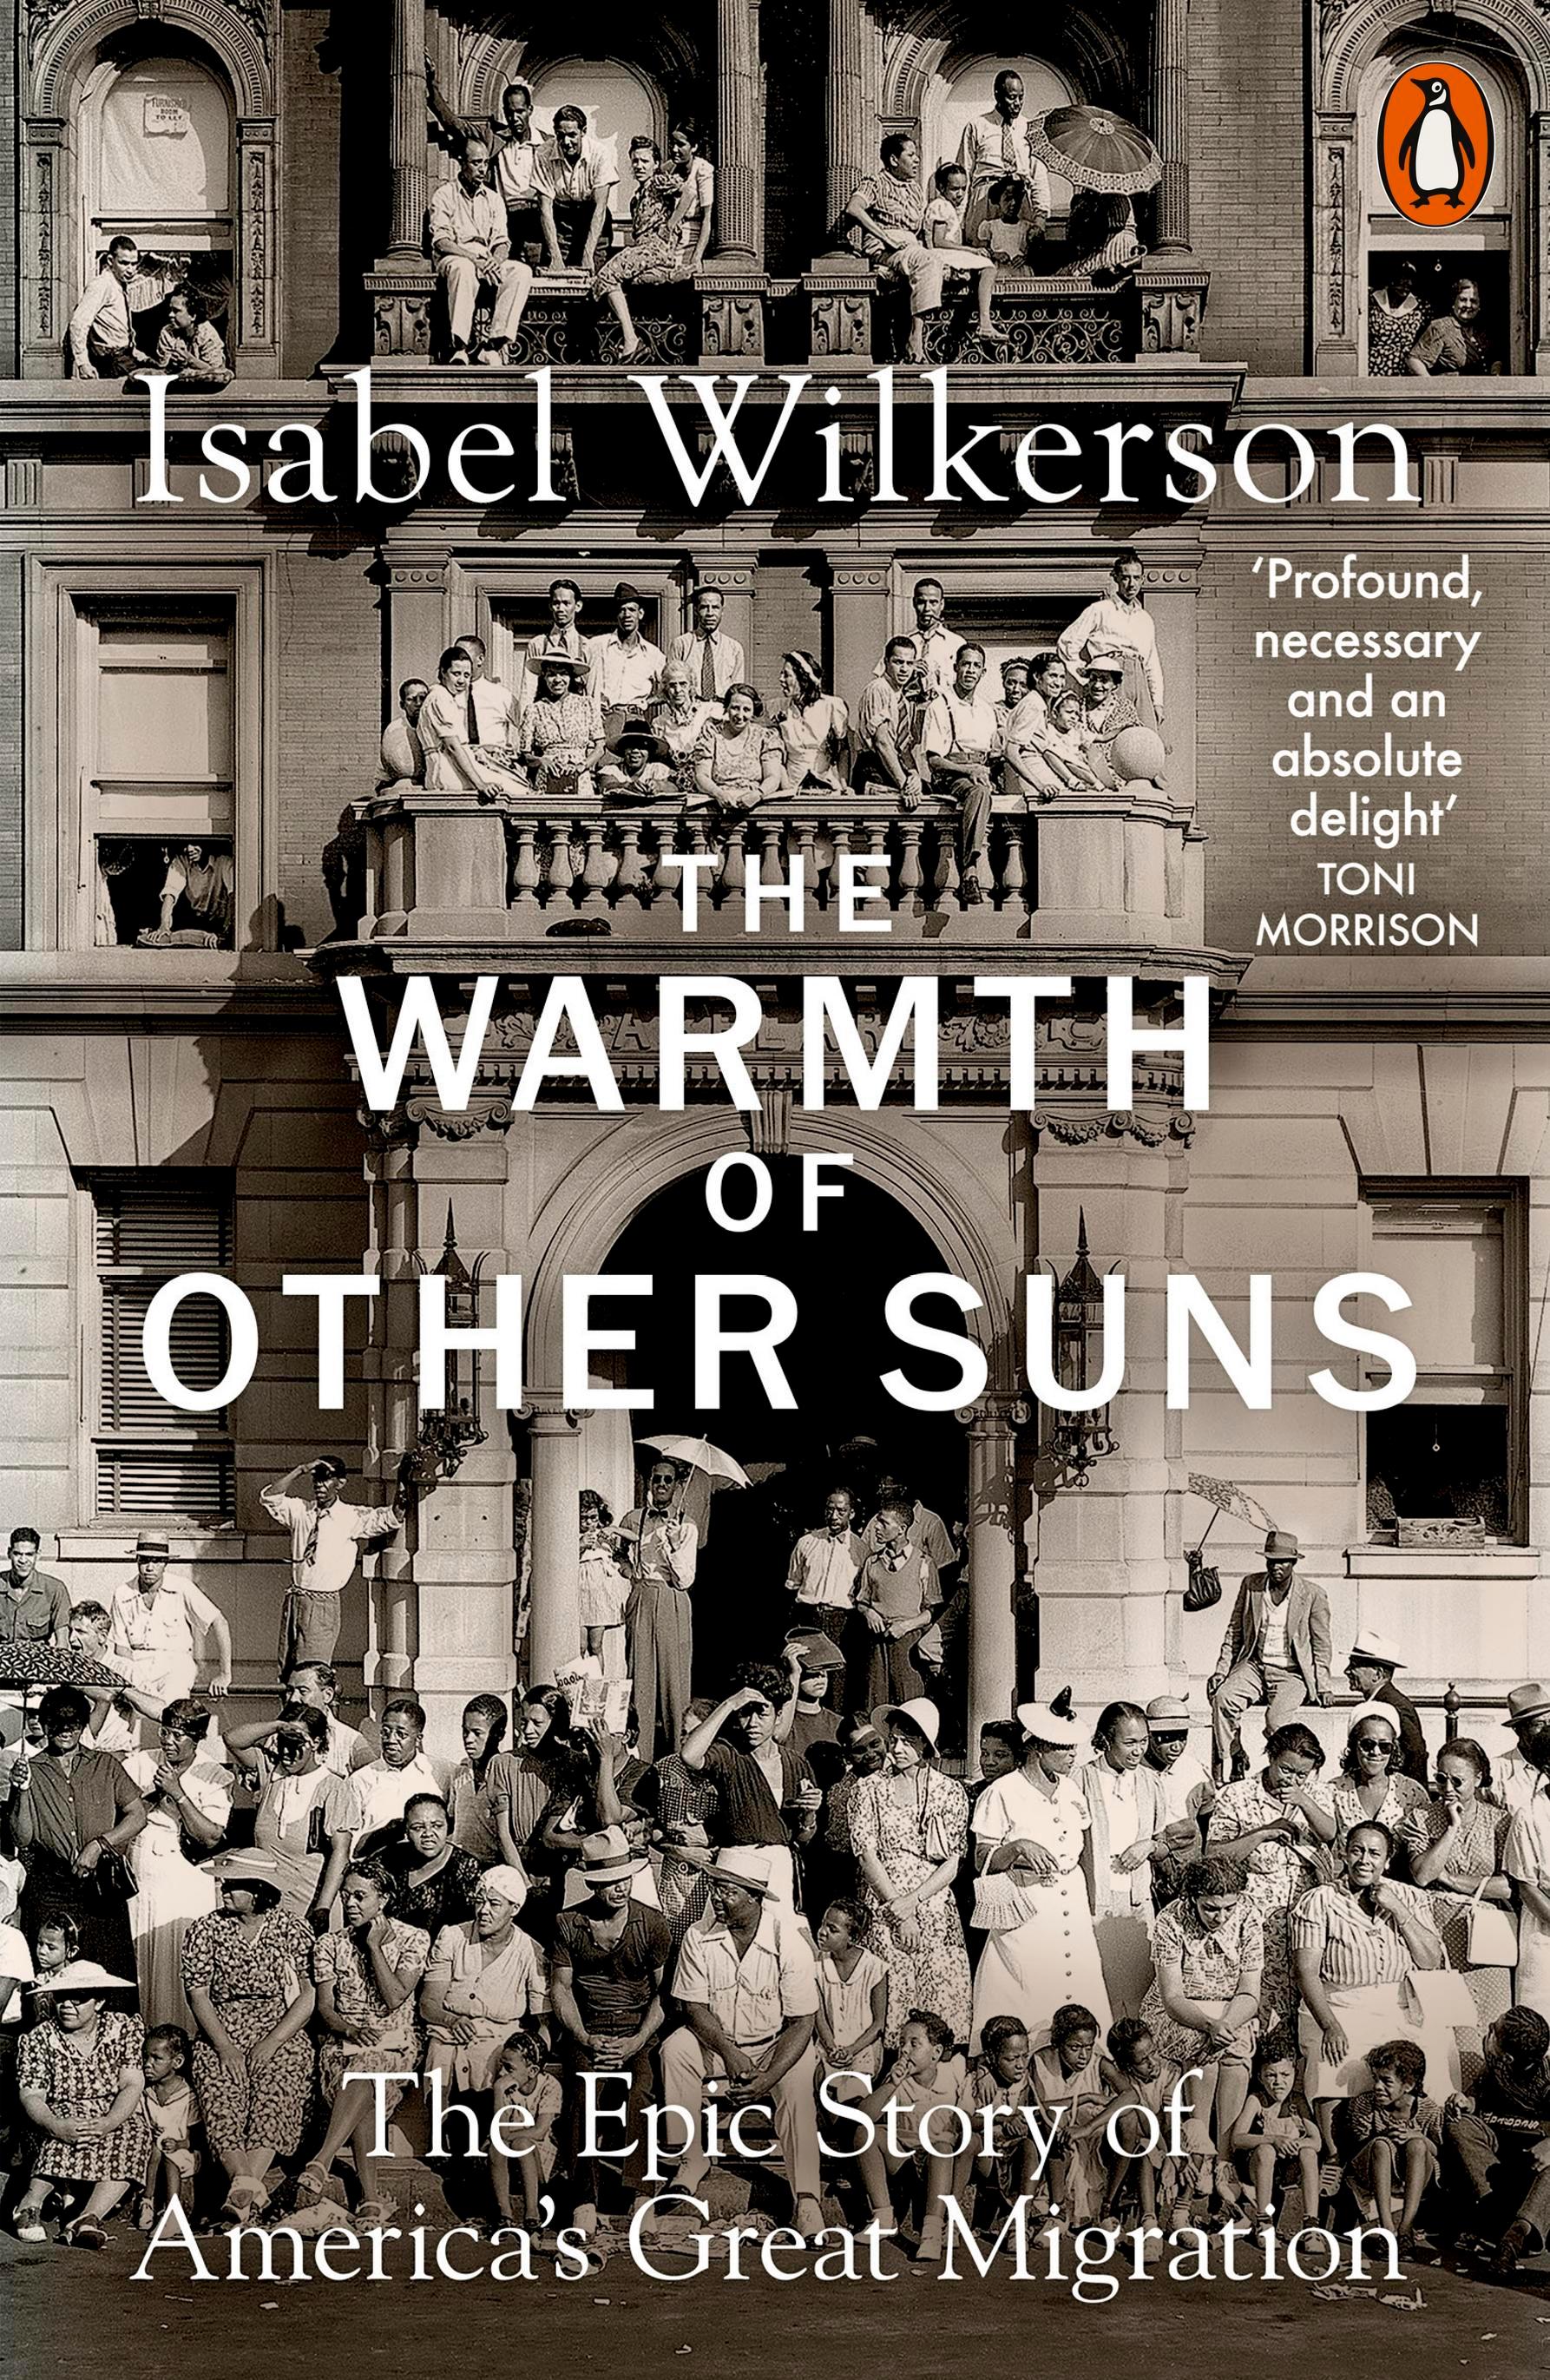 The Warmth of Other Suns / The Epic Story of America's Great Migration / Isabel Wilkerson / Taschenbuch / 622 S. / Englisch / 2020 / Penguin Books Ltd (UK) / EAN 9780141995151 - Wilkerson, Isabel